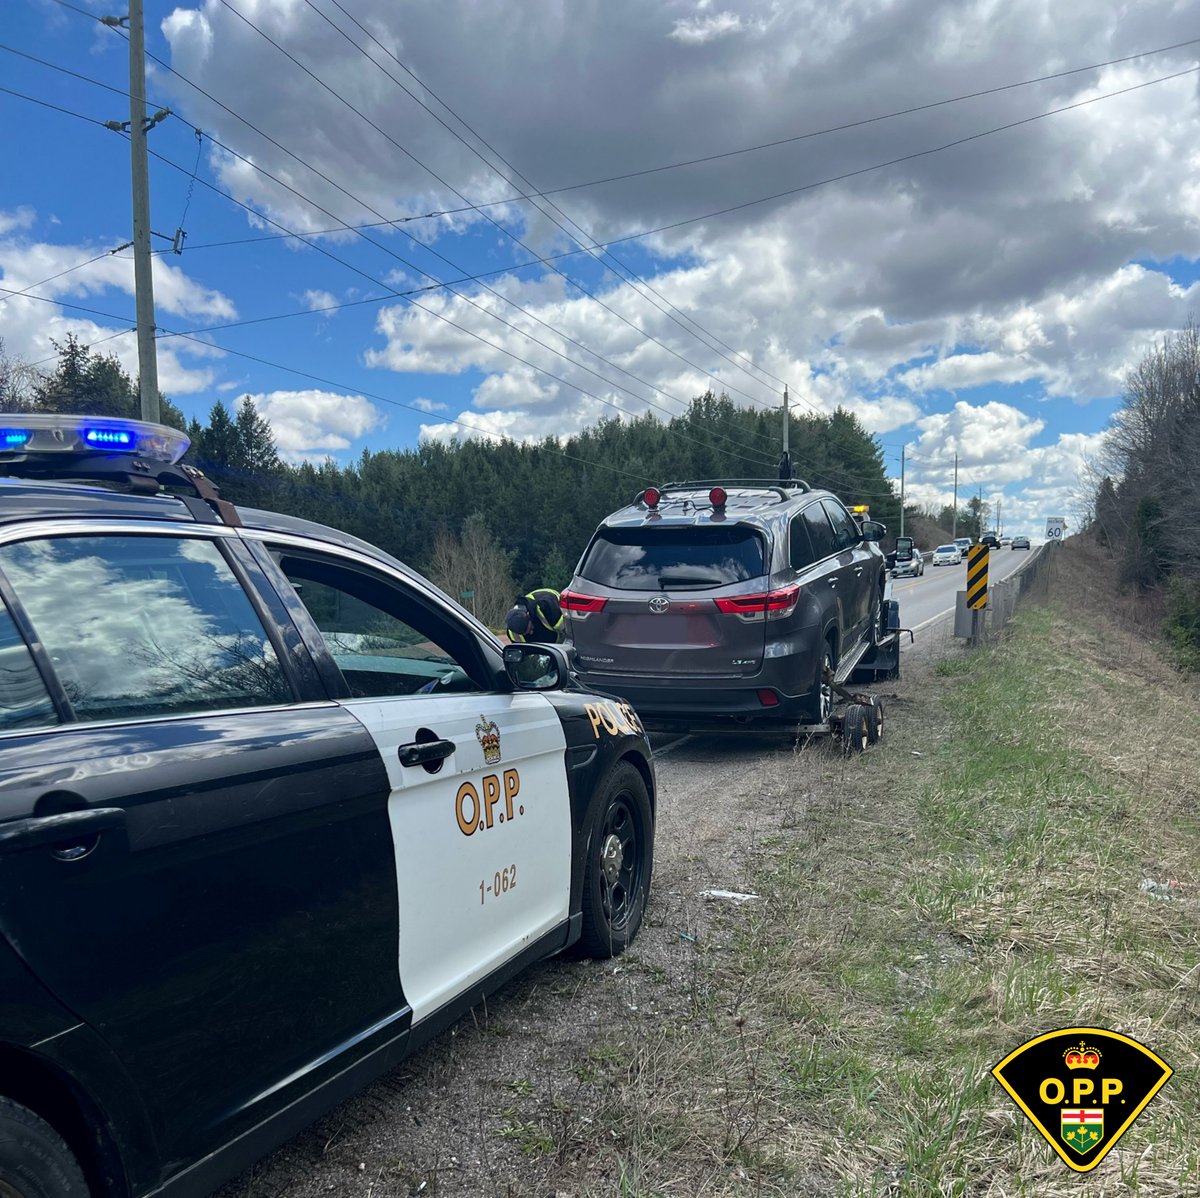 #CaledonOPP has charged this driver with #StuntDriving for traveling 56km/hr over the posted speed limit! Their driver's licence has been suspended for a period of 30-days, and their vehicle impounded for a period of 14-days. #SlowDown #DriveSafe ^jn